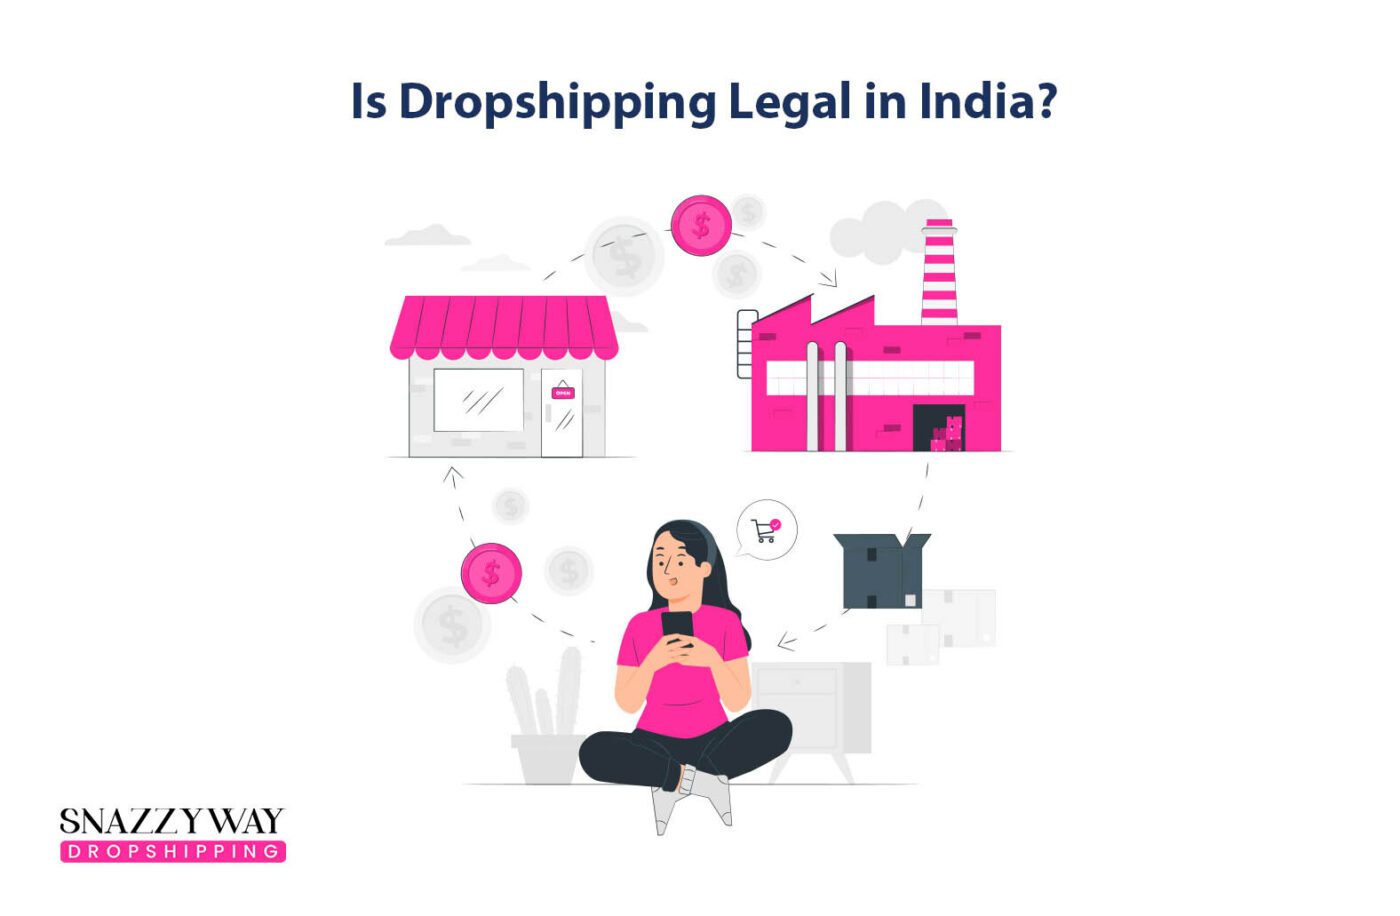 Is Dropshipping Legal in India?